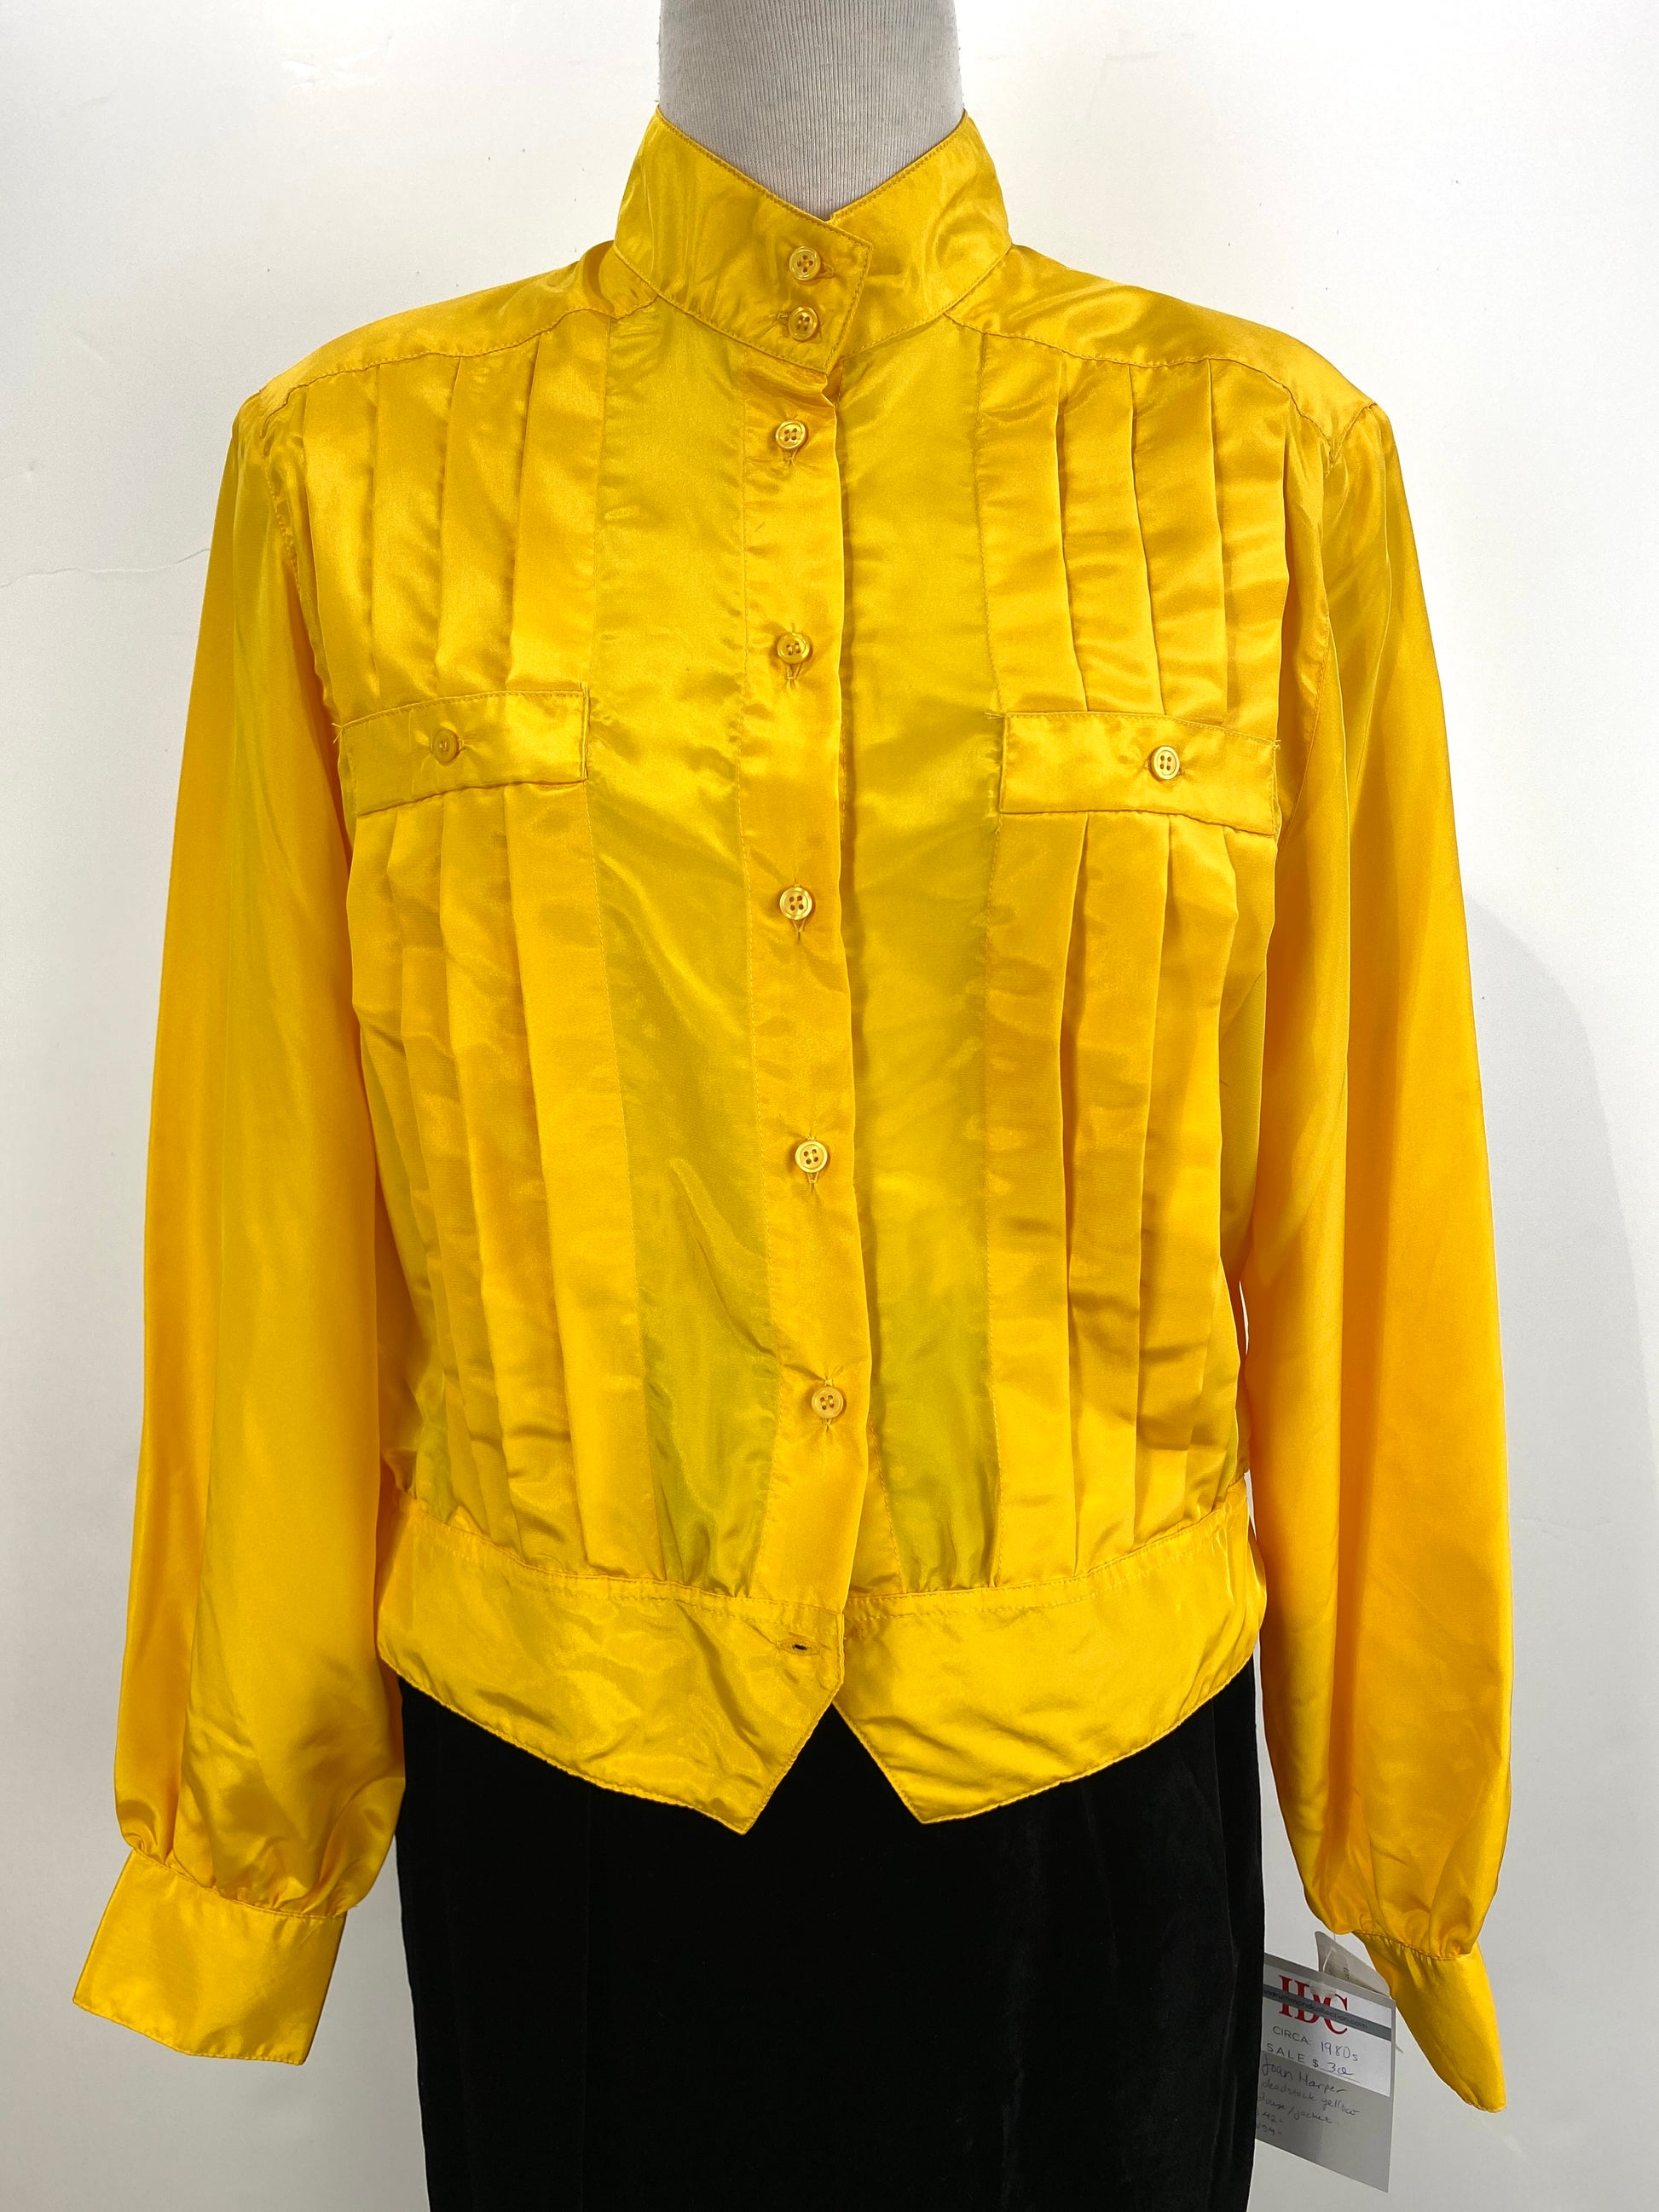 Vintage 1980s Deadstock Bright Yellow Pleated Blouse, Joan Harper, NOS